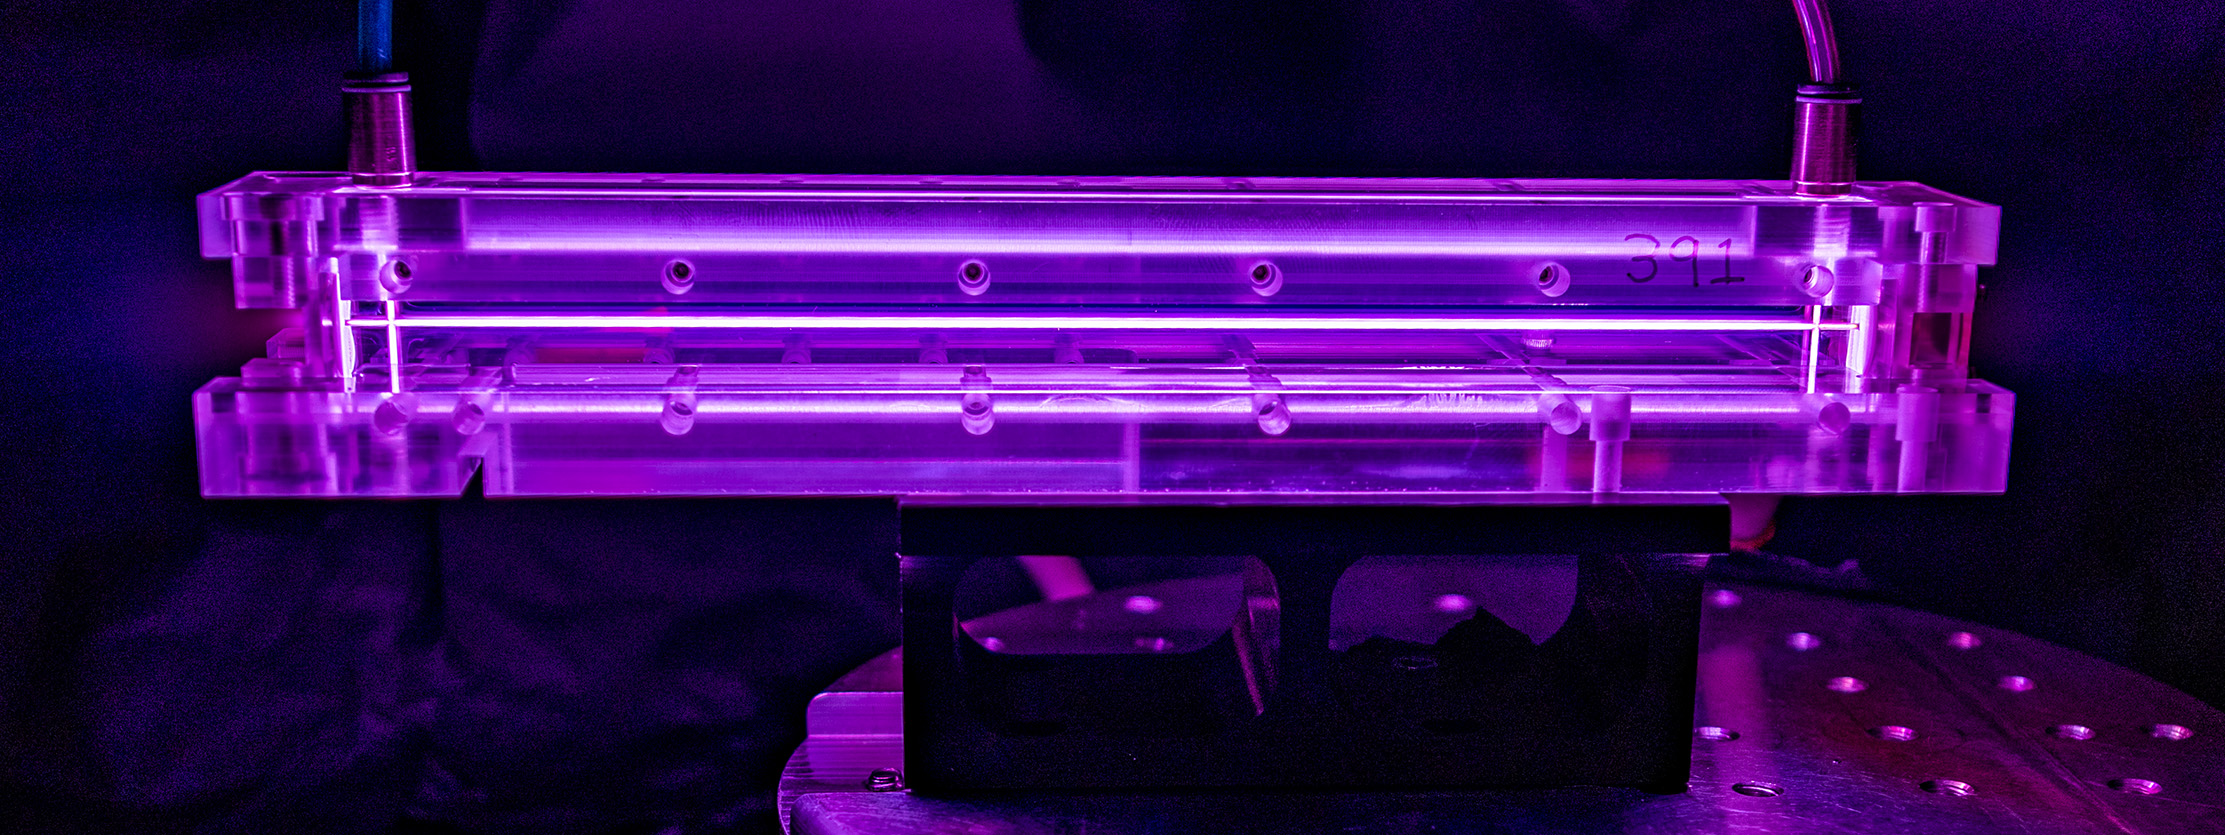 The plasma-filled capillary at the heart of a laser-plasma accelerator glows purple